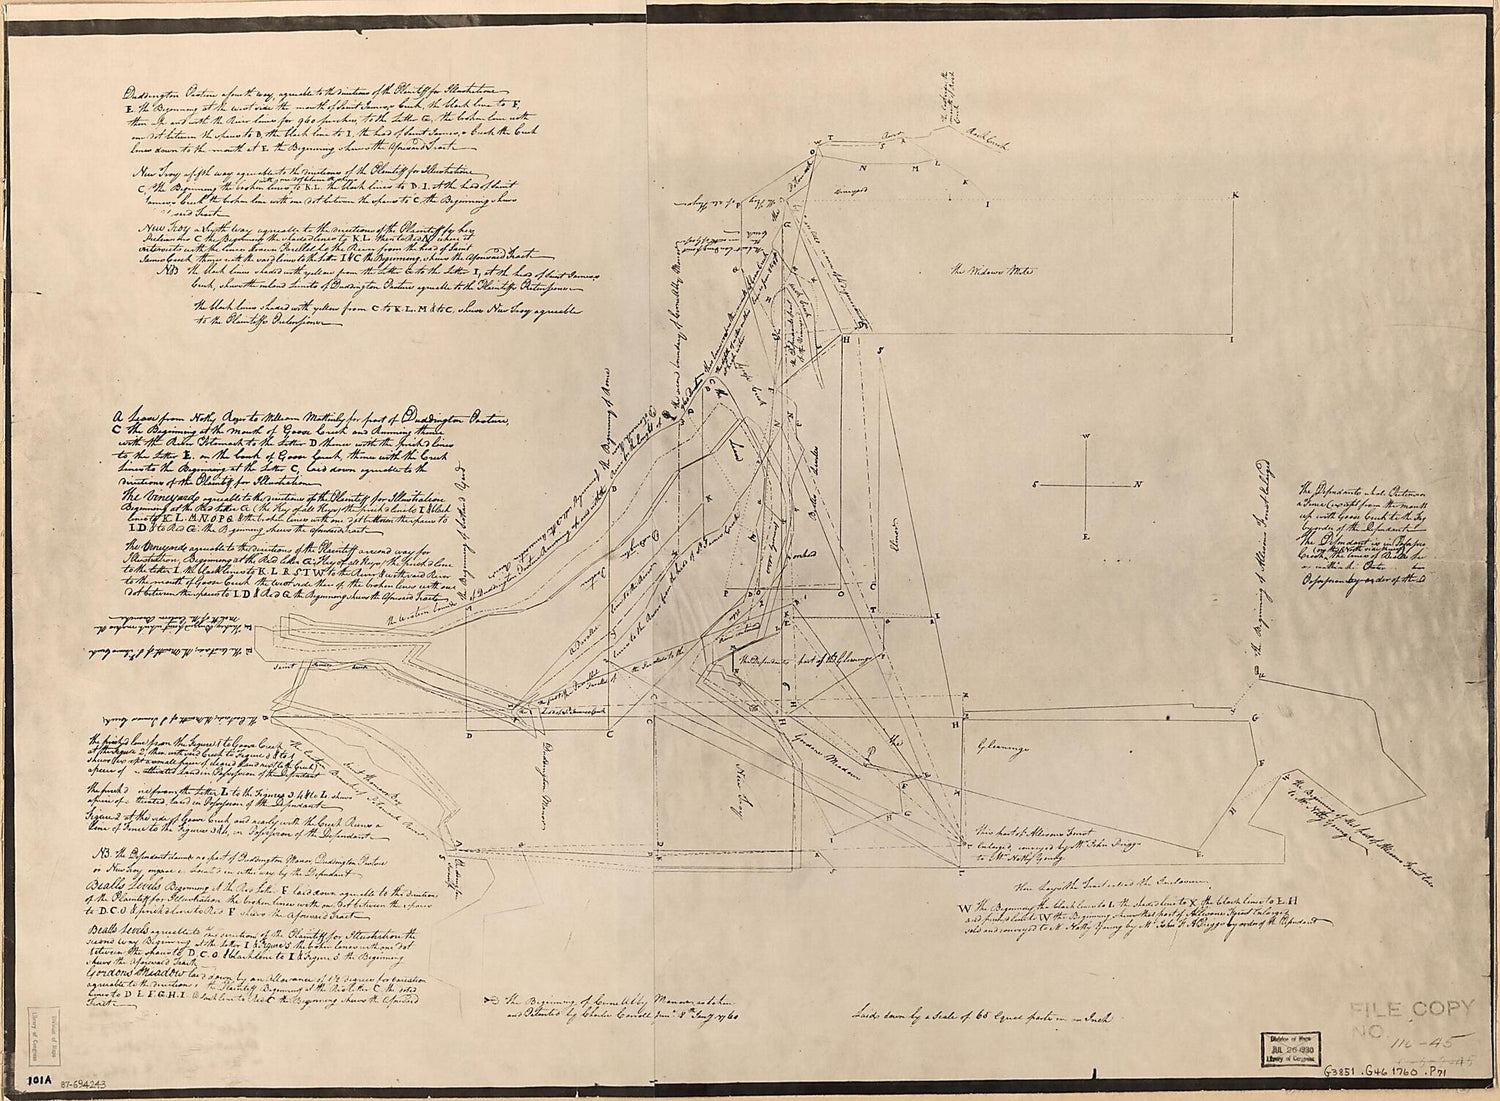 This old map of Property Survey of That Part of Prince Georges County, Maryland, Later to Become Central Washington D.C. from 1760 was created by John F. A. Priggs in 1760